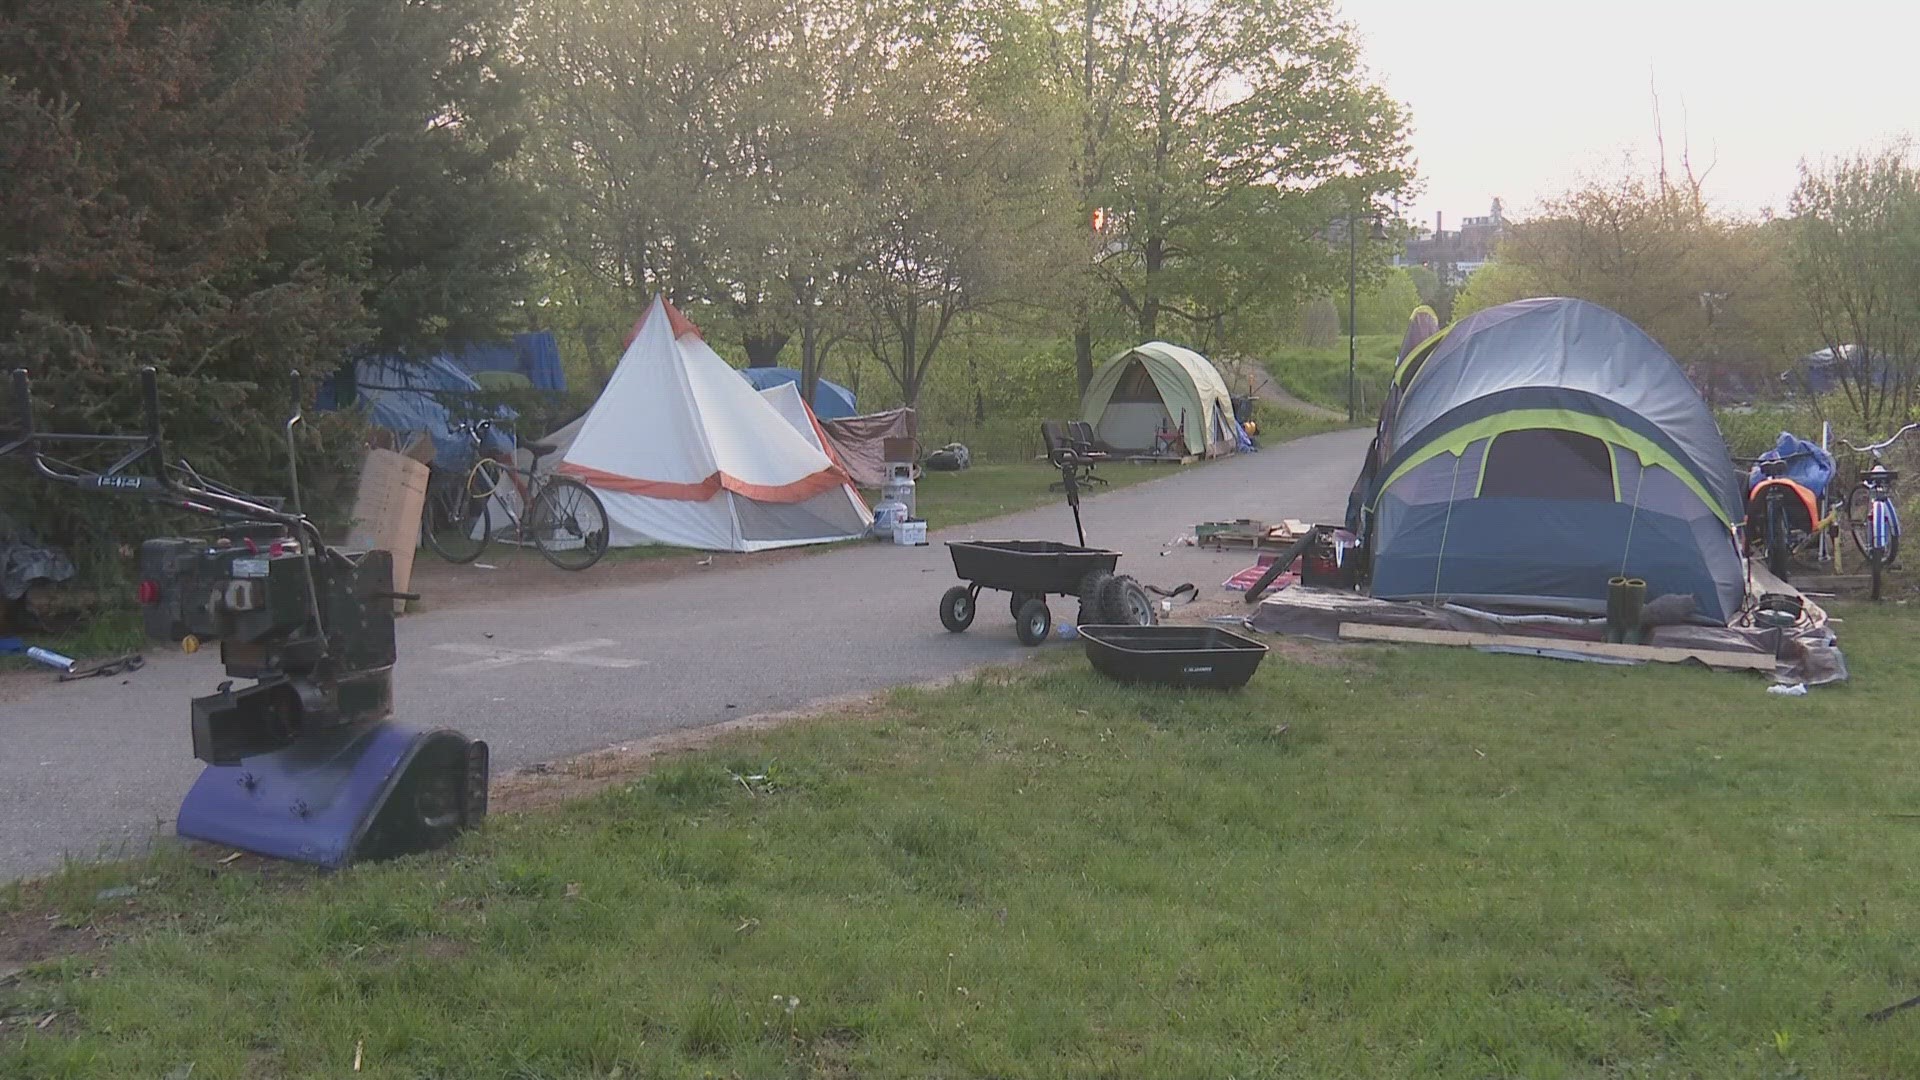 Preble Street and several councilors said Tuesday they are asking the city to postpone its plans to remove unhoused people from the Fore River Parkway encampment.